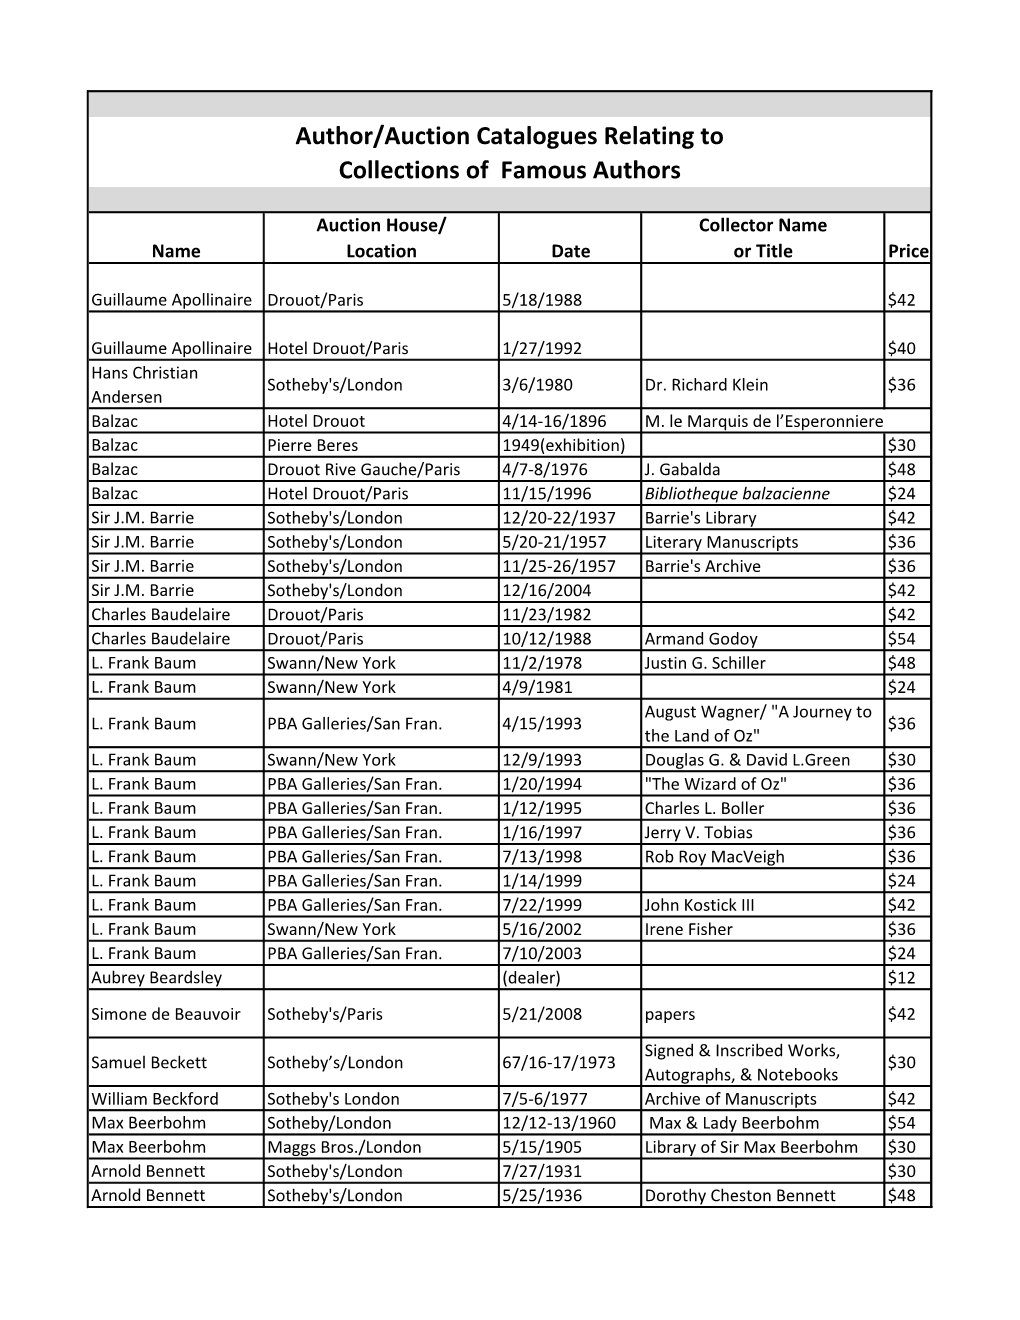 Author/Auction Catalogues Relating to Collections of Famous Authors